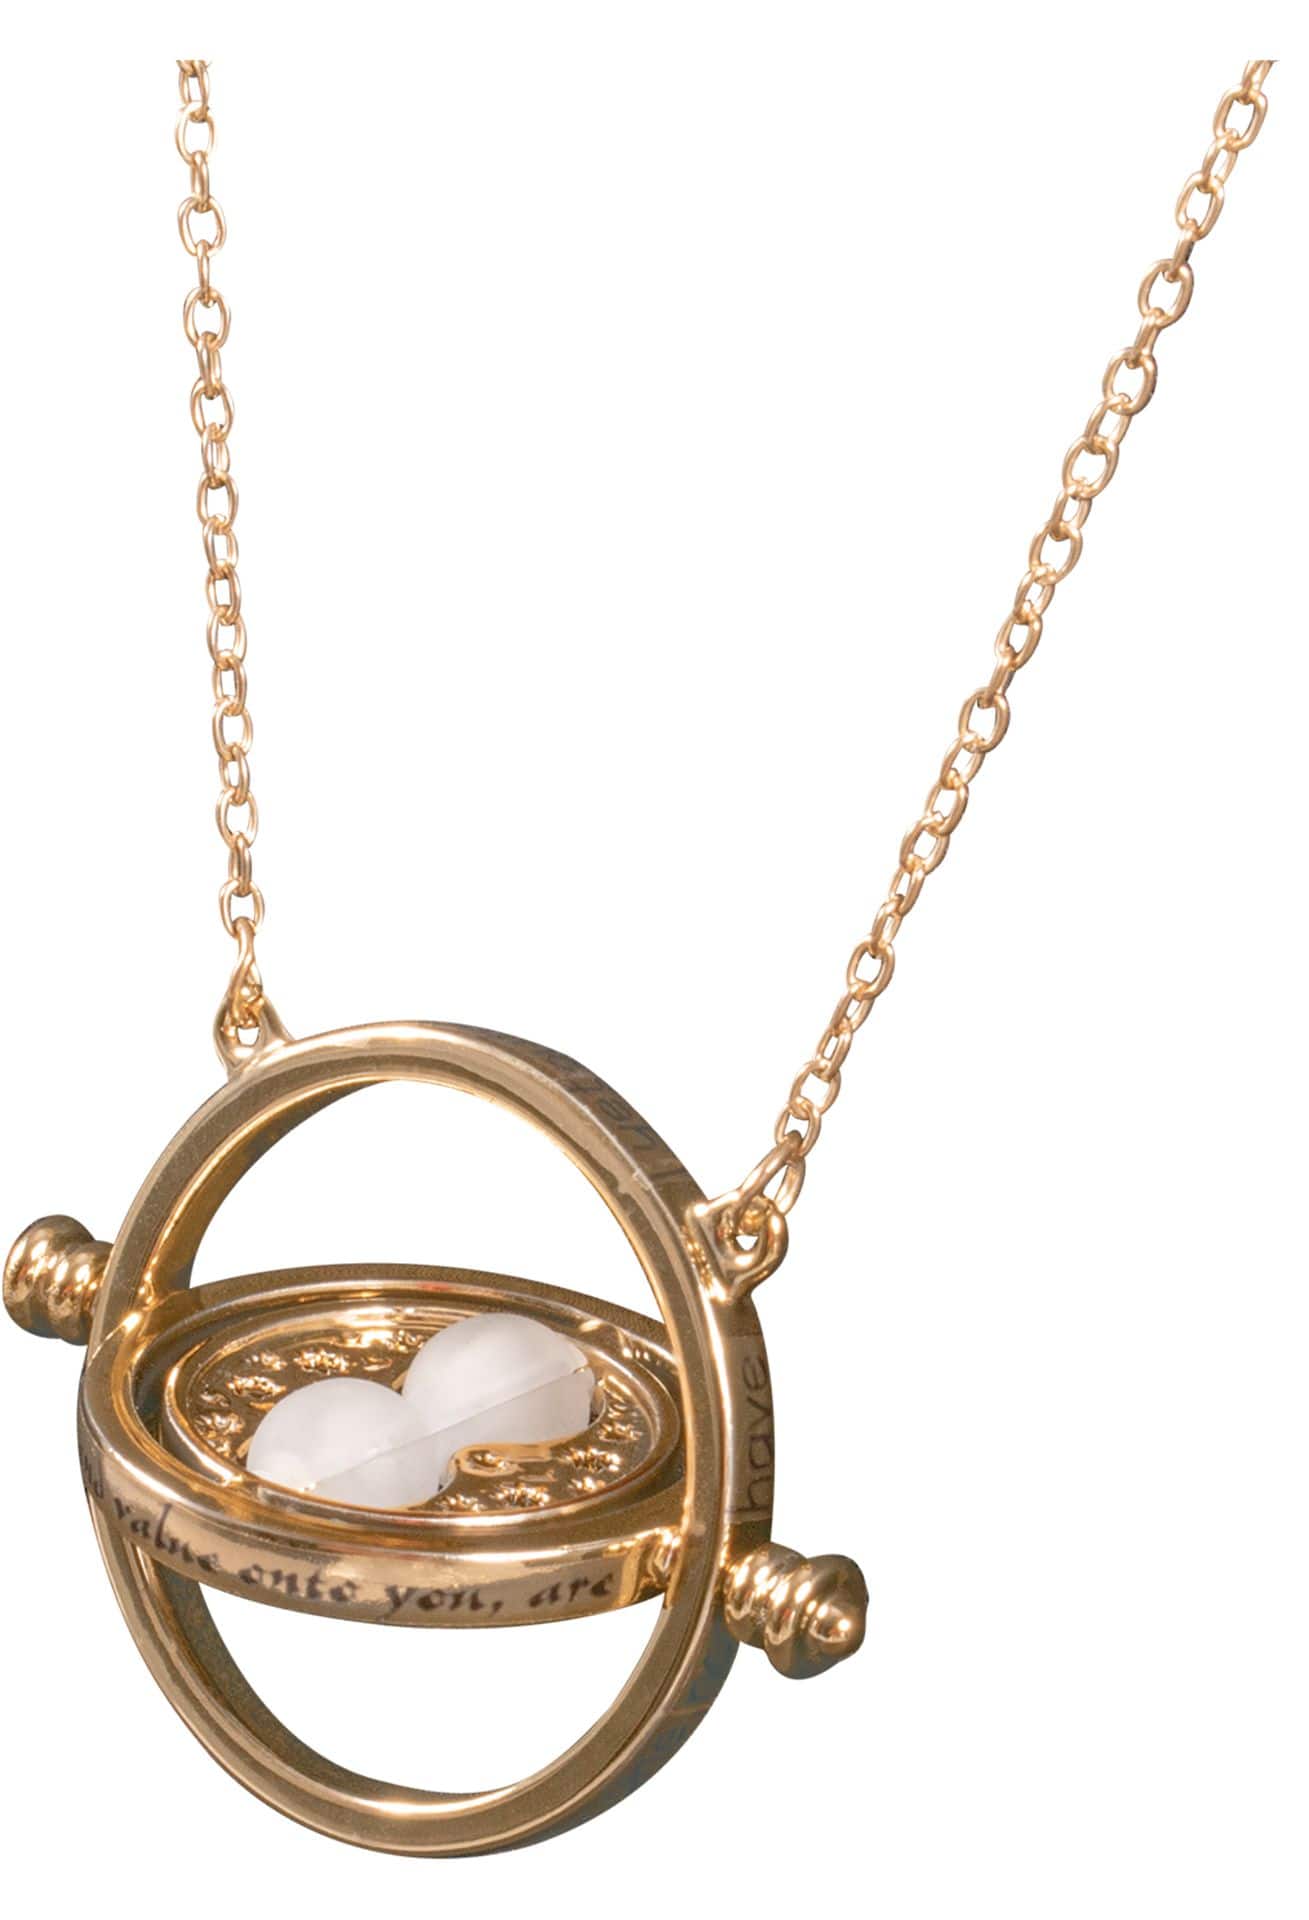 Harry Potter - Time-Turner Necklace 1:1 Scale Life-Size Prop Replica with  Display Case by Noble Collection | Popcultcha